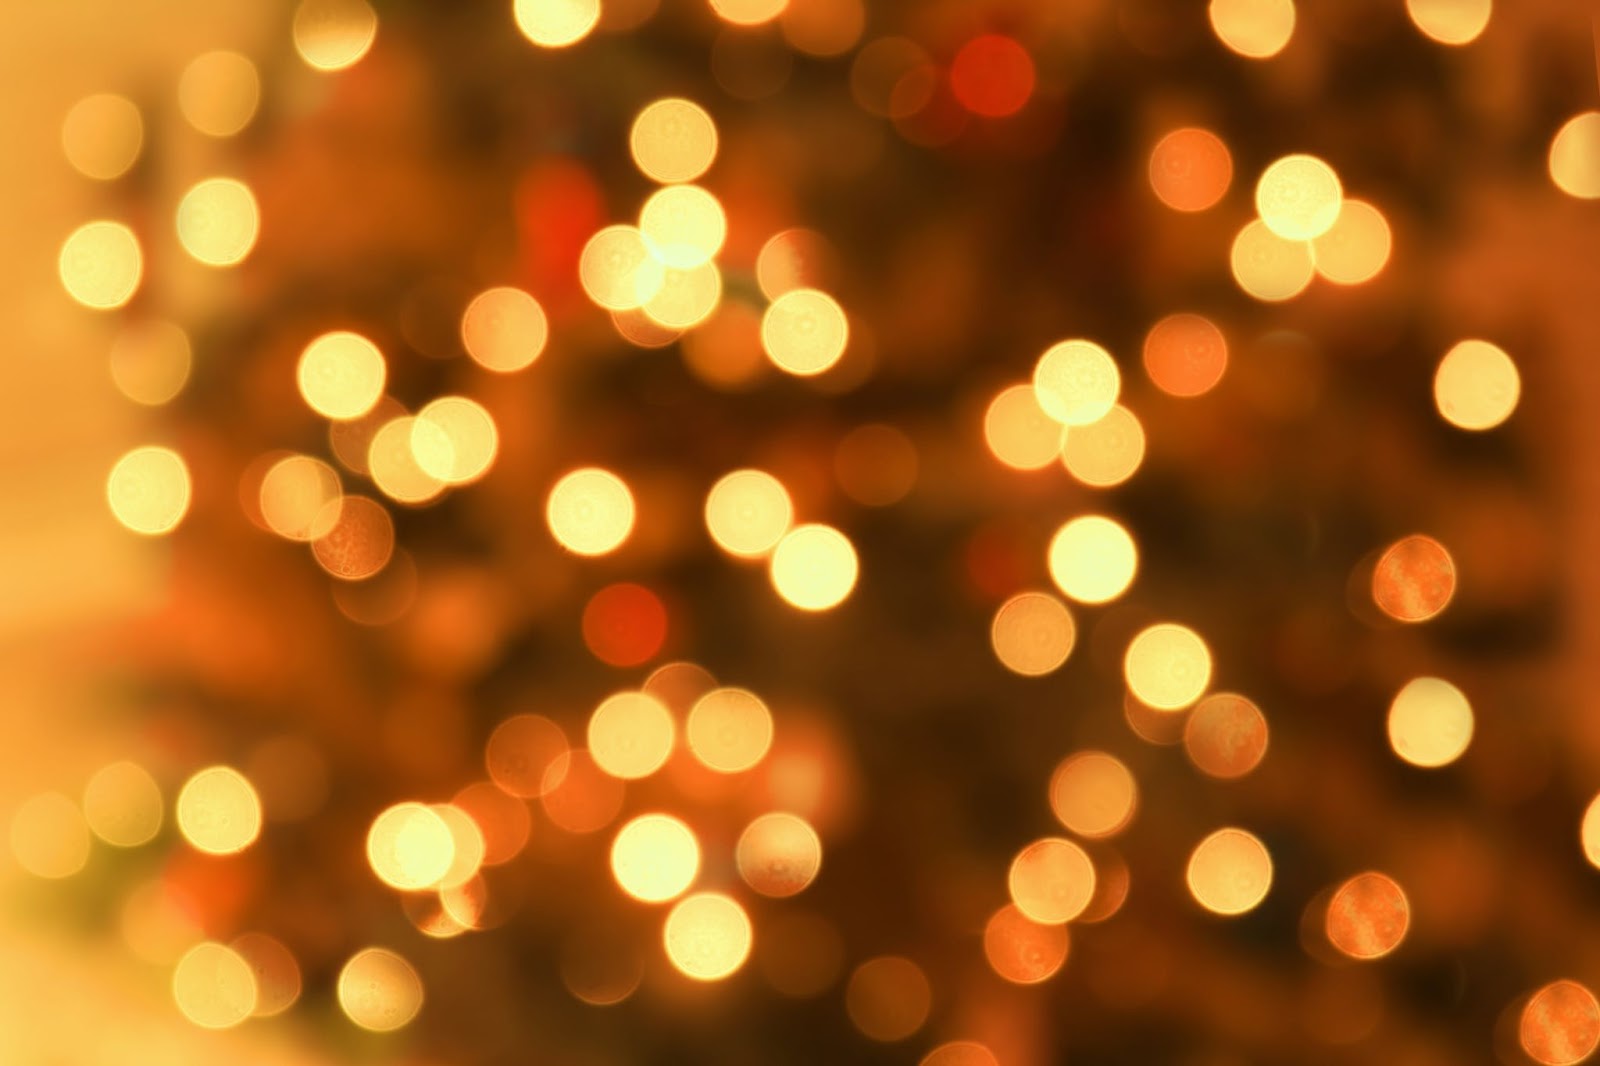 Defocused selection of Christmas lights glowing amber and gold